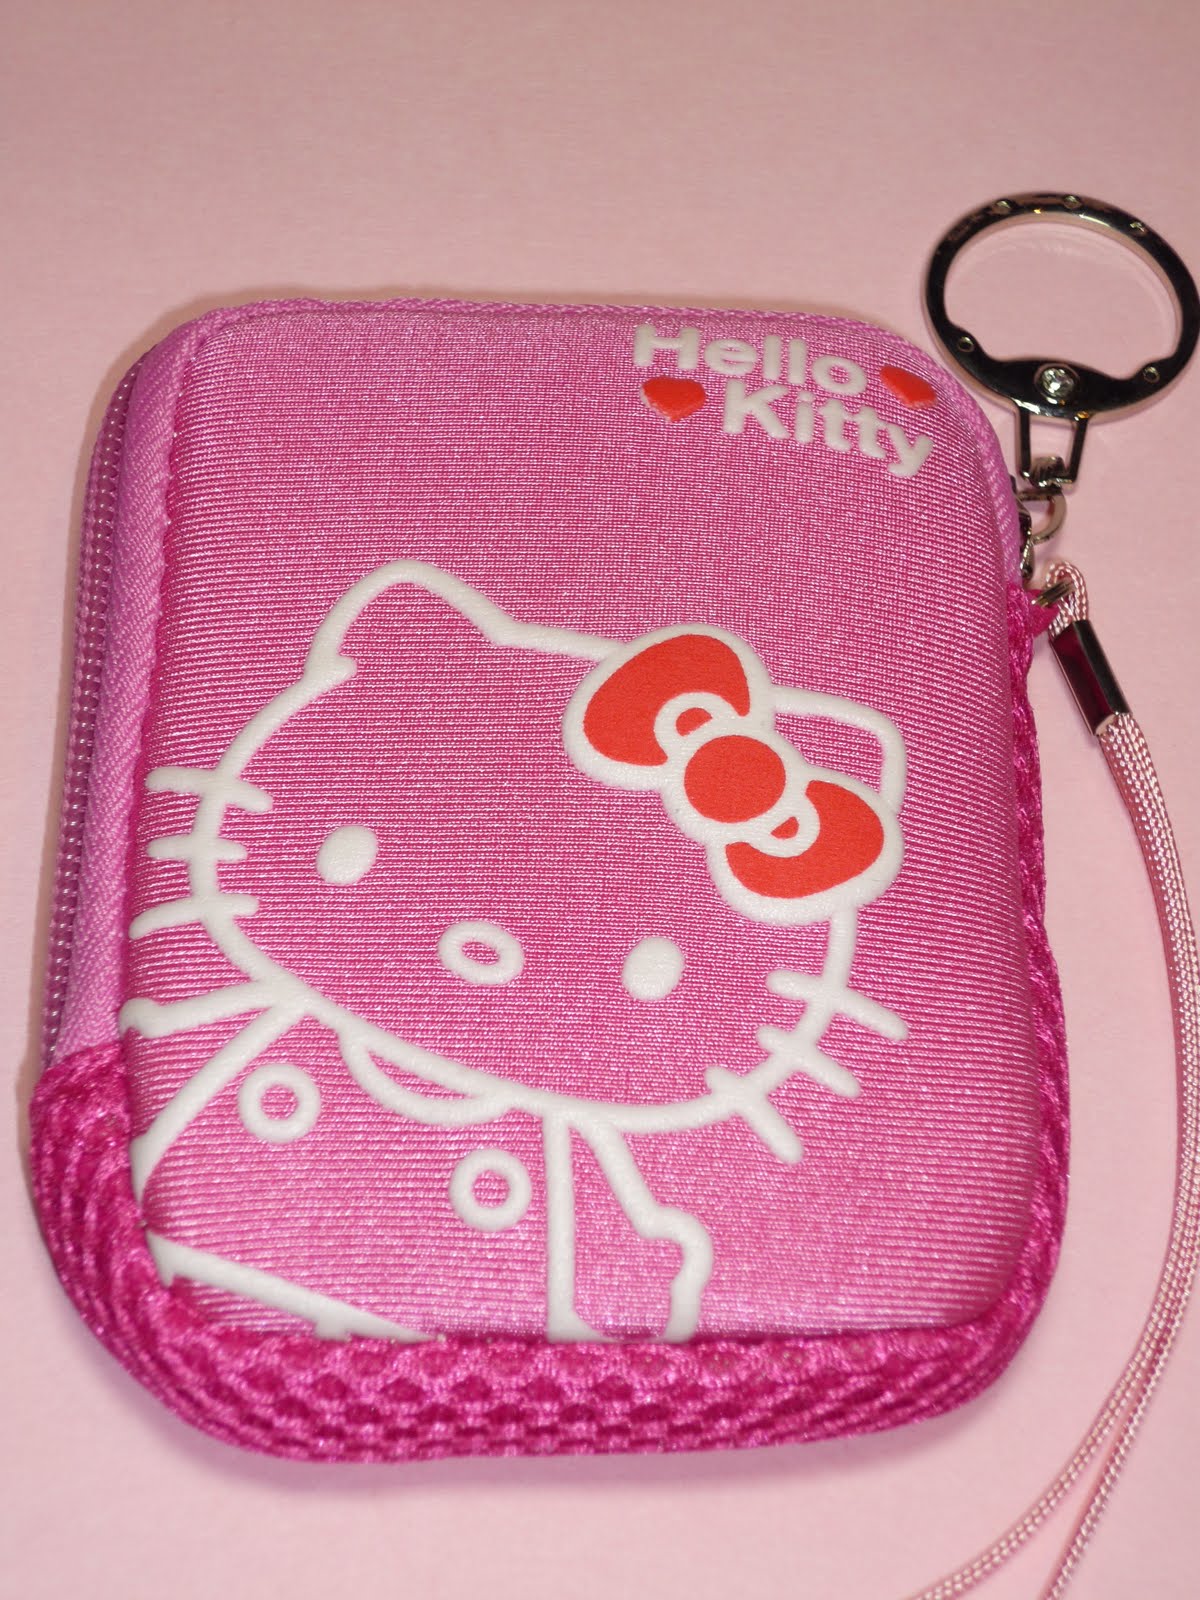 Welcome to Hello Kitty and My Melody E-shop: Hello Kitty, My Melody ...